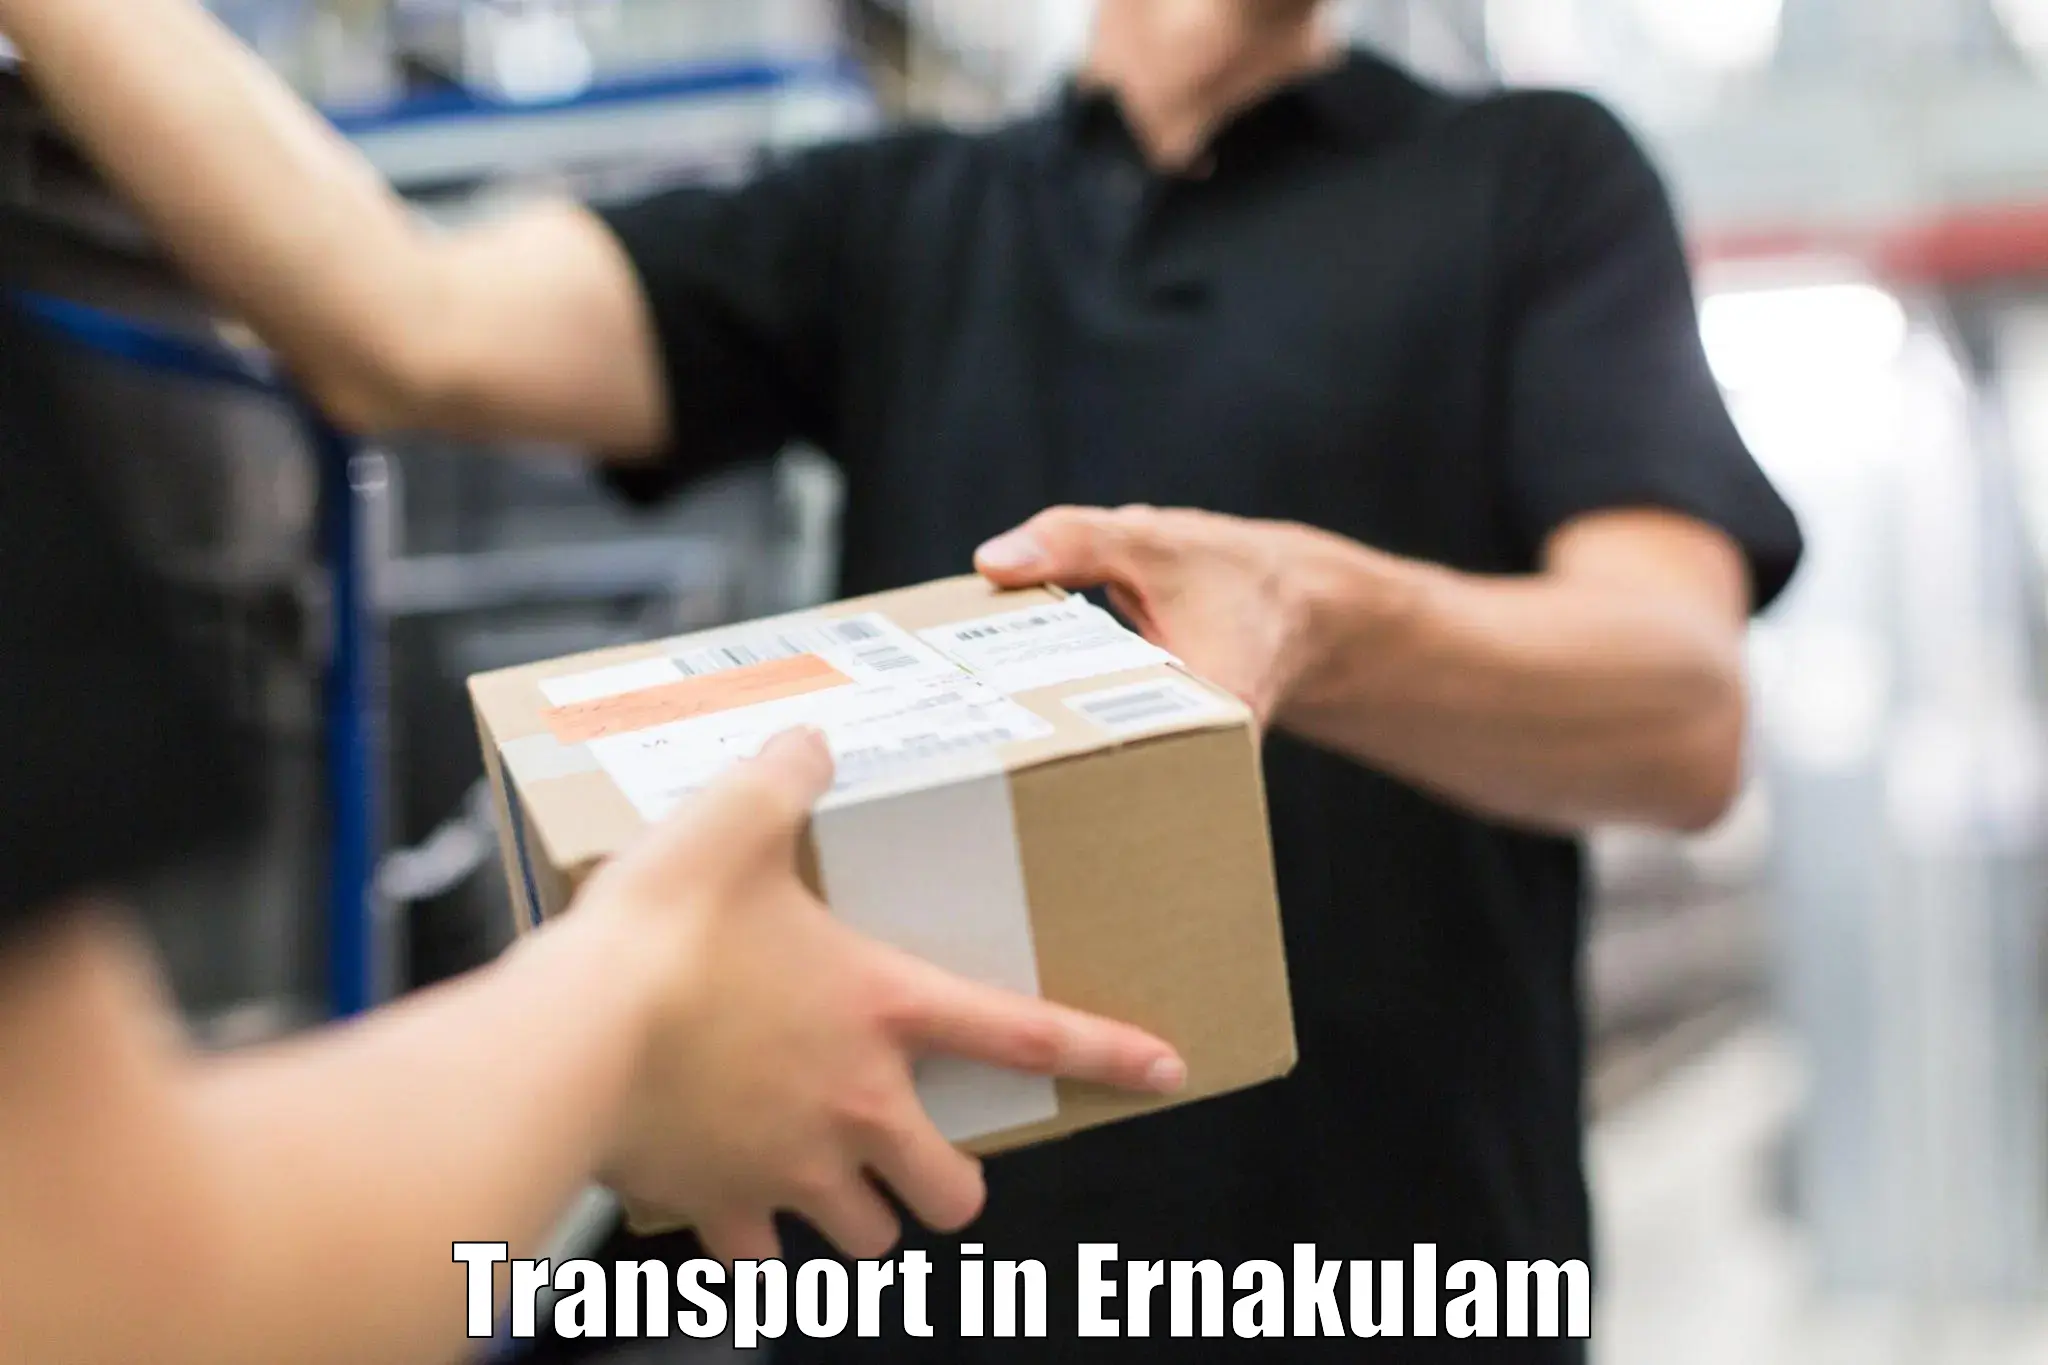 Air freight transport services in Ernakulam